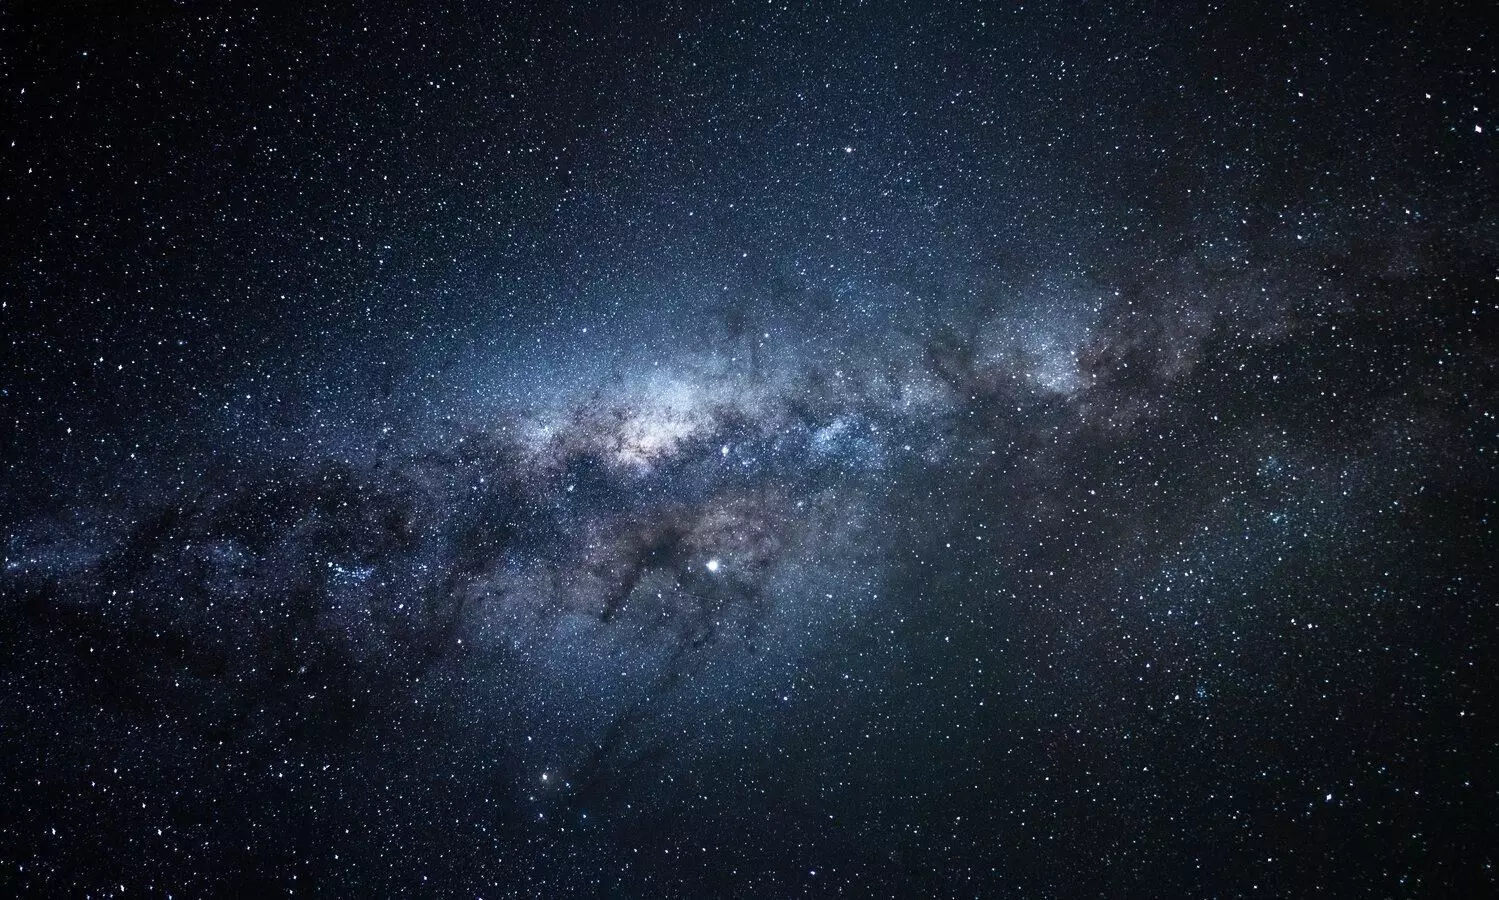 Scientists discover mysterious unknown object in Milky Way